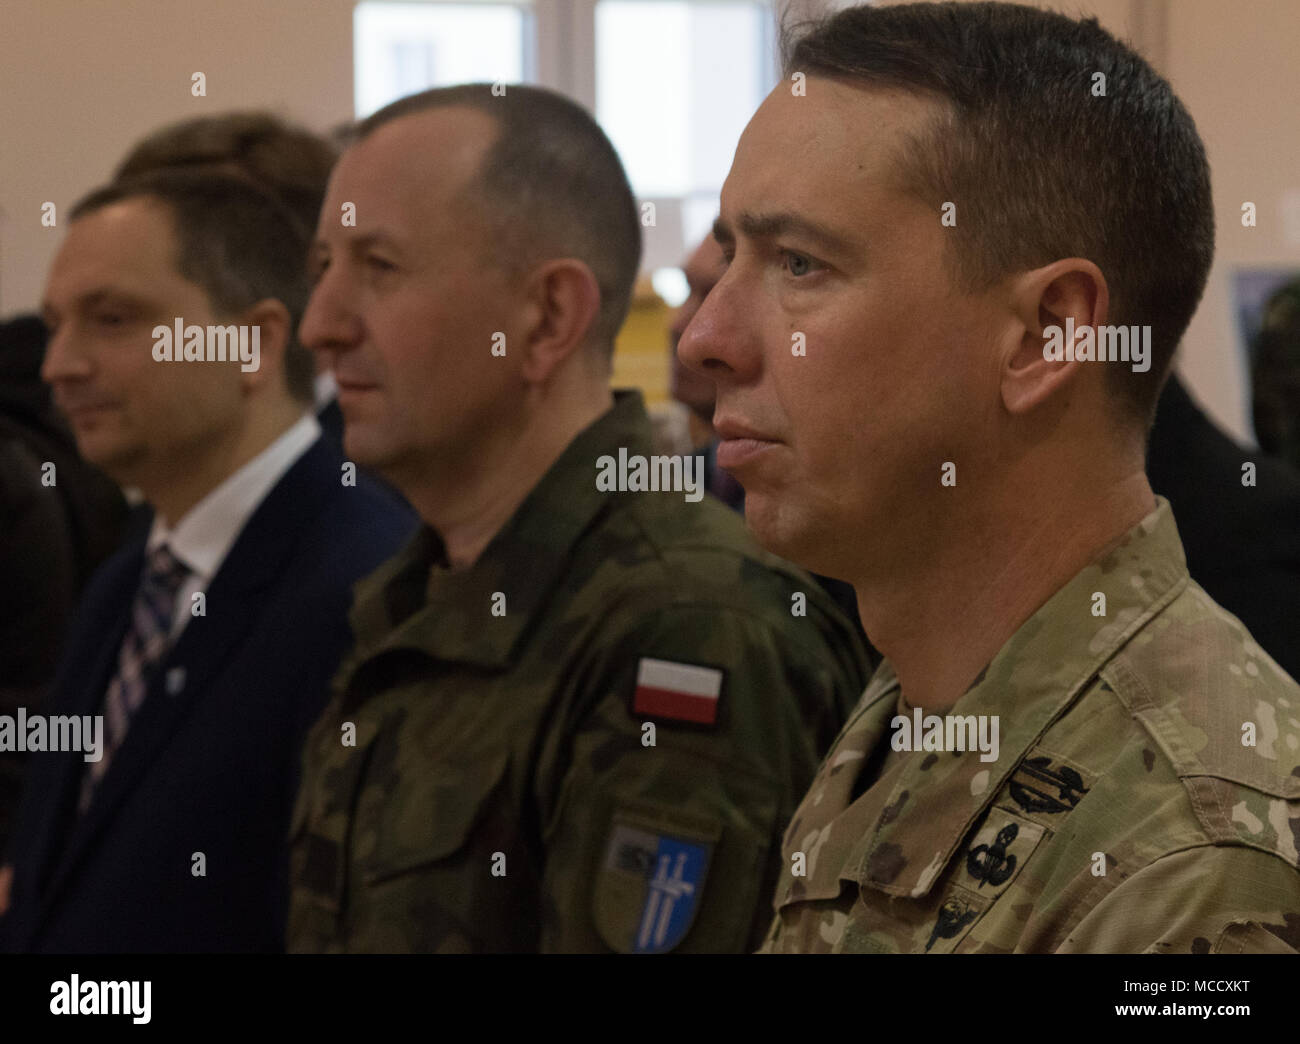 The leaders of Battle Group Poland and local community leaders listen to Andrea Bekić, the Croatian Ambassador to Poland, speak as she expresses gratitude to Polish leaders and shares Croatian culture during a Croatian cultural celebration at the Polish 15th Mechanized Brigade headquarters, Poland, Feb. 12, 2018. The unique, multinational battle group is comprised of U.S., U.K., Croatian and Romanian soldiers serve with the Polish 15th Mechanized Brigade as a deterrence force in northeast Poland in support of NATO’s Enhanced Forward Presence. (U.S. Army photo by Spc. Andrew McNeil/ 22nd Mobile Stock Photo